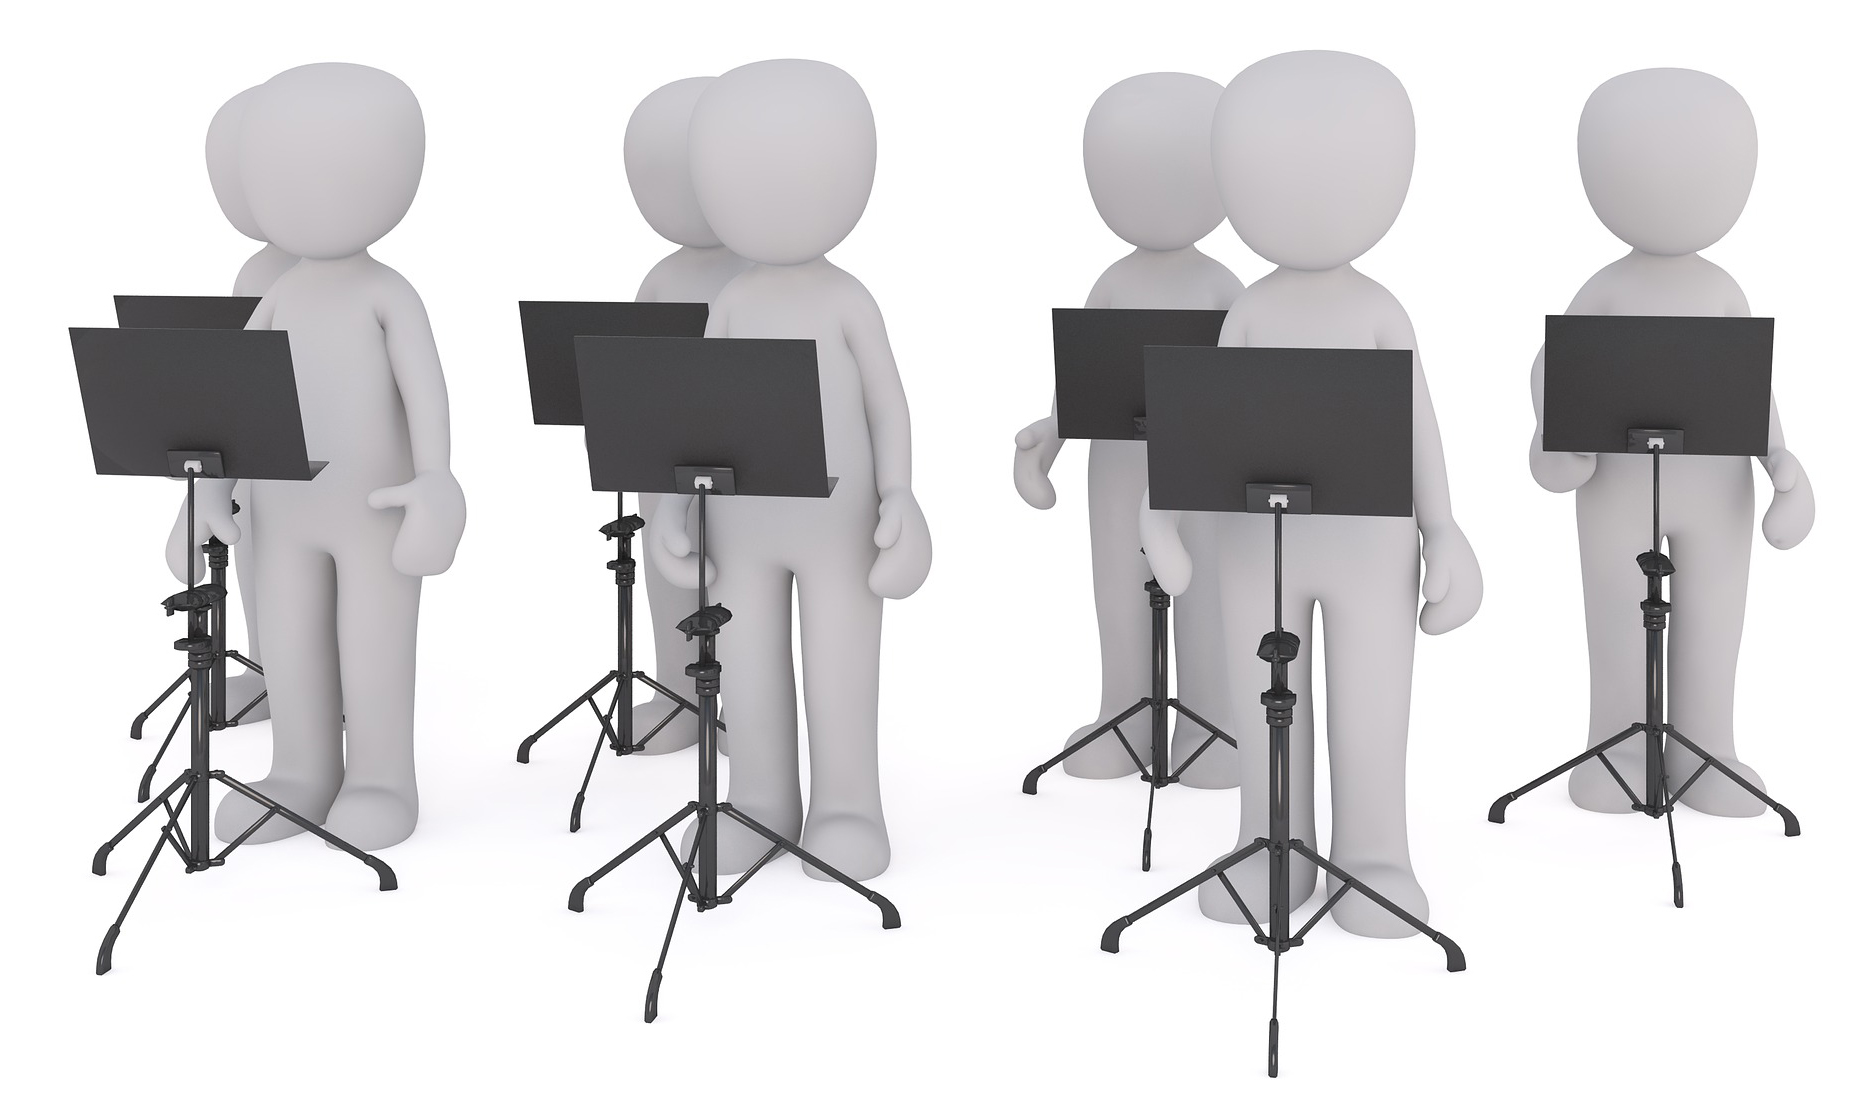 A group of faceless mannequins standing in front of music stands.